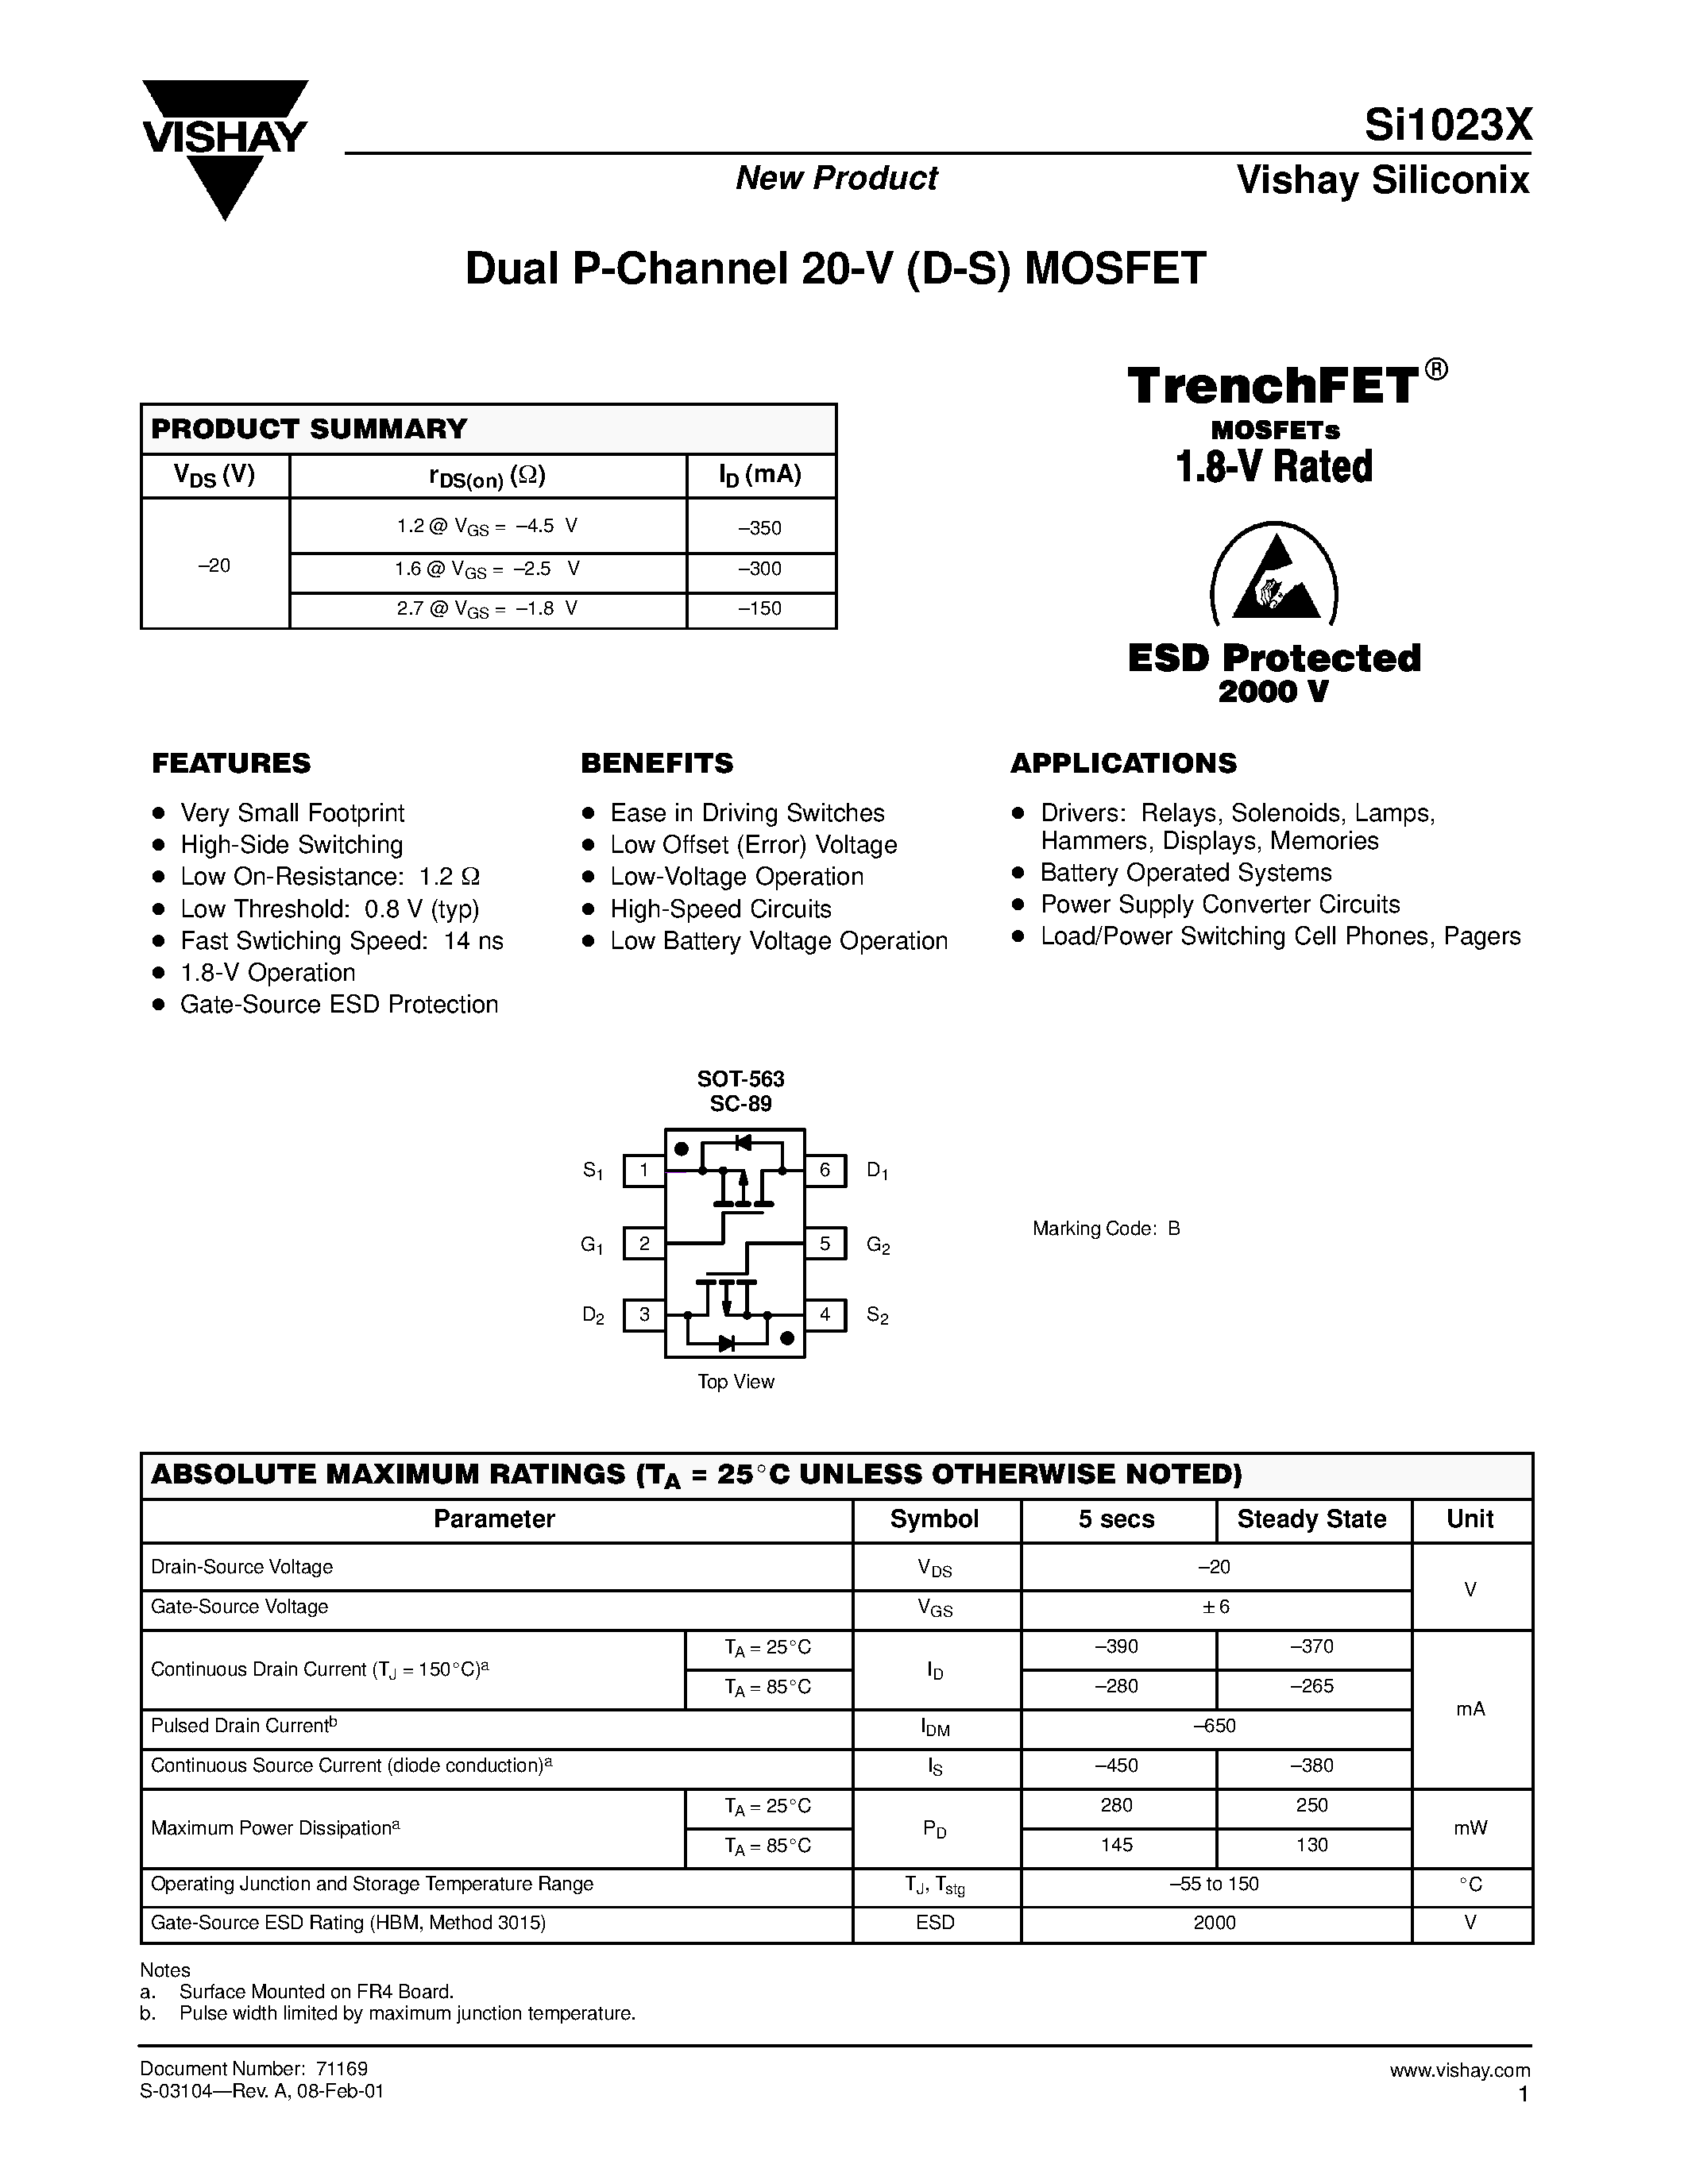 Даташит SI1023X - Dual P-Channel 20-V (D-S) MOSFET страница 1